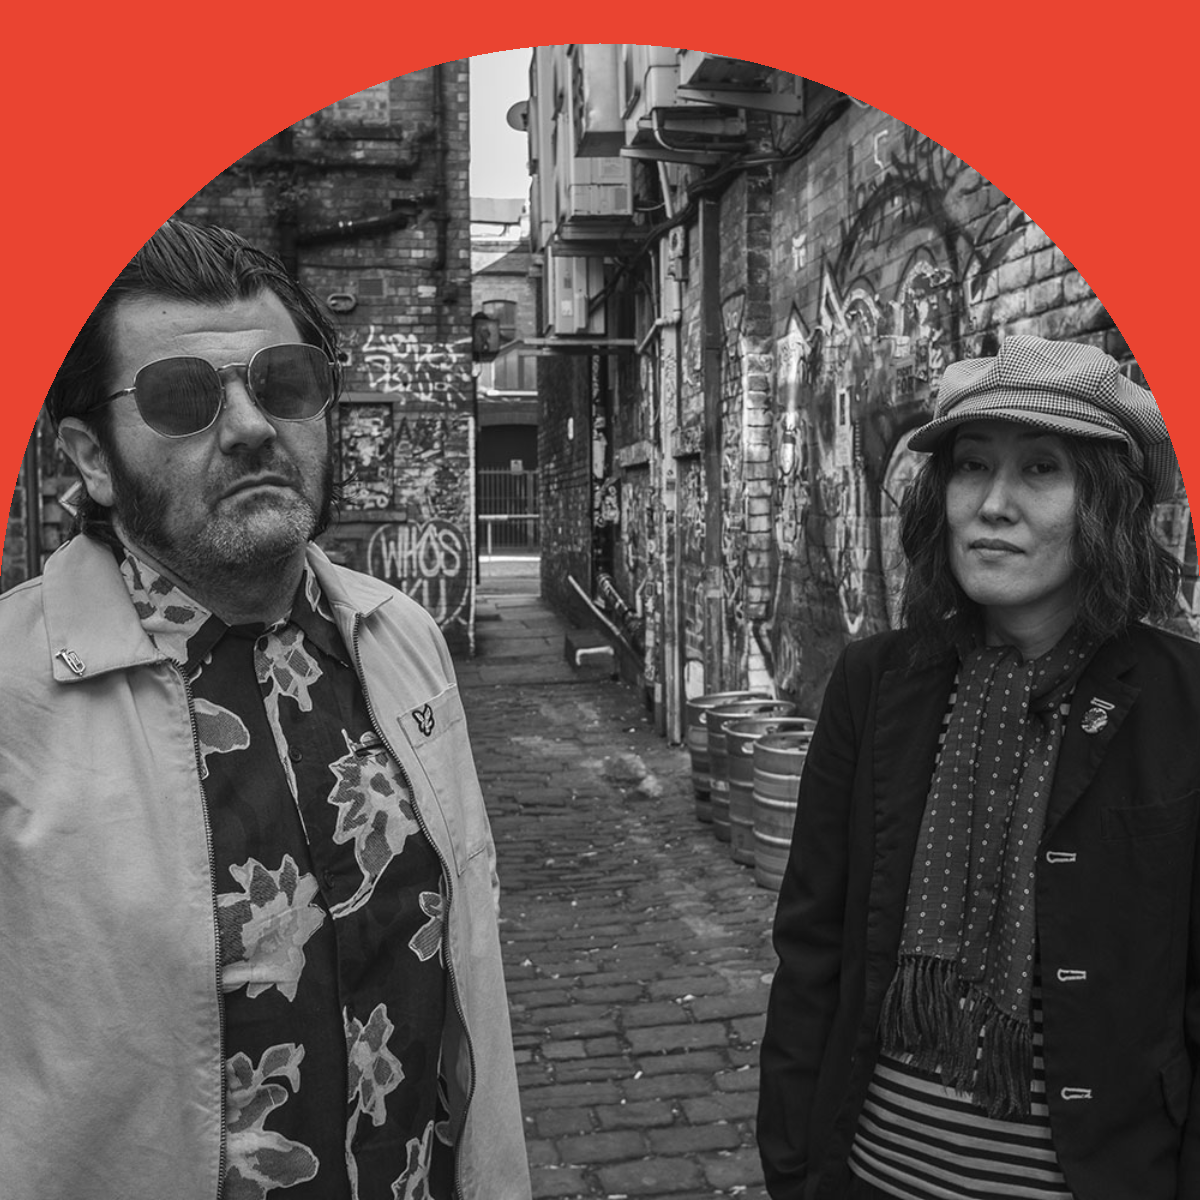 +++ THE DIRT, 31st October +++ Manchester's premiere psych/post-punk duo THE DIRT hit N&D for a special Halloween show. Support comes from DEAD STILETTOS and SUPERA MORZA whilst DJ ASTRAL ELEVATOR will keep the party going into the night. £8 early birds